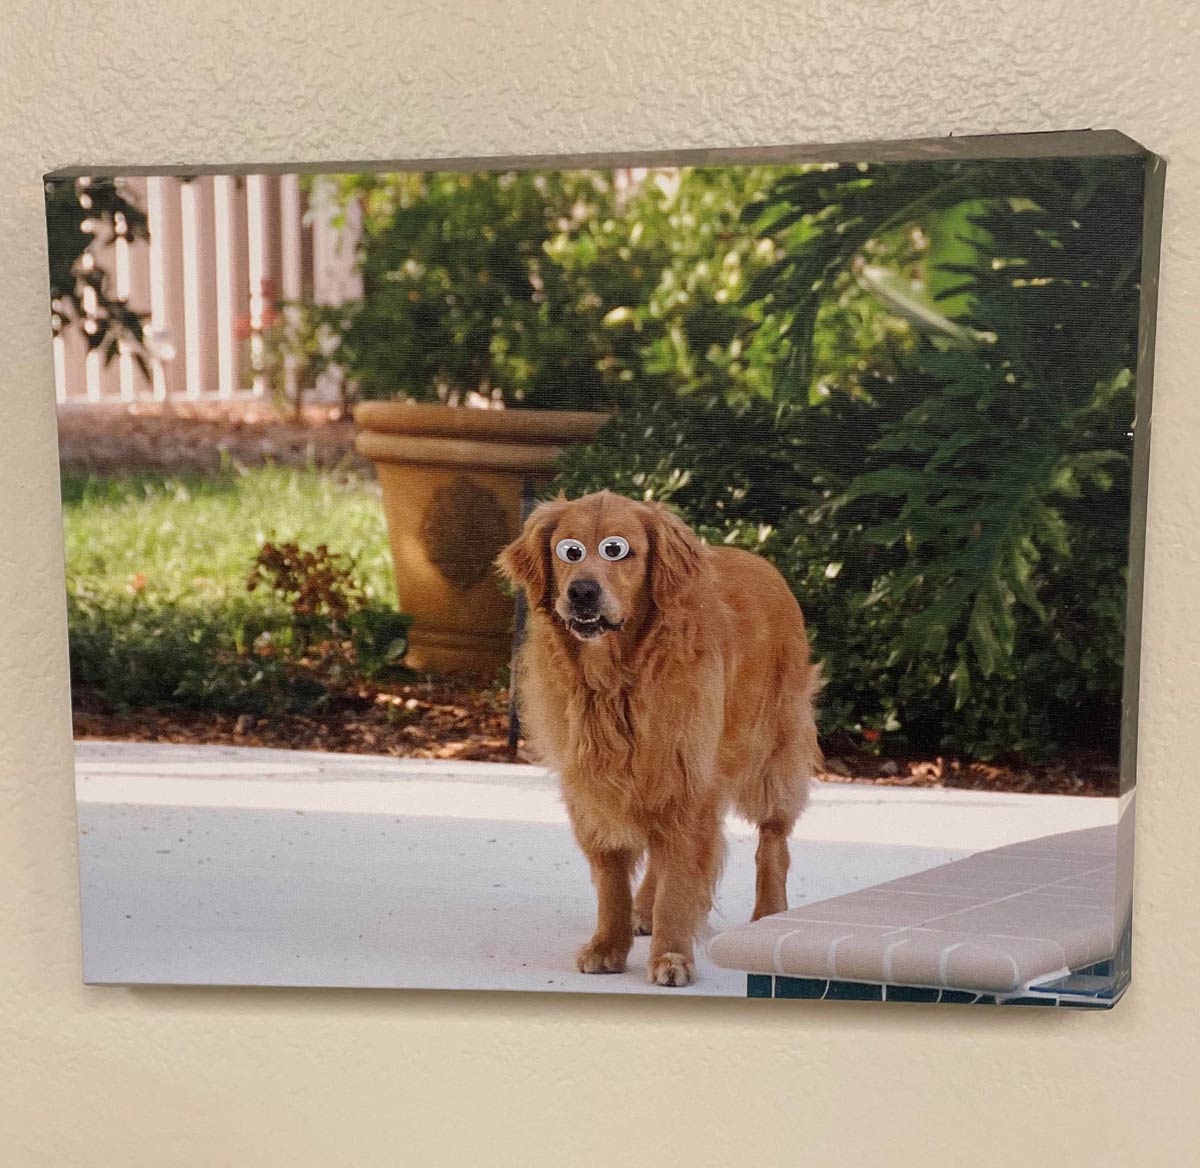 Somebody put googly-eyes on the photo at the veterinarian’s office